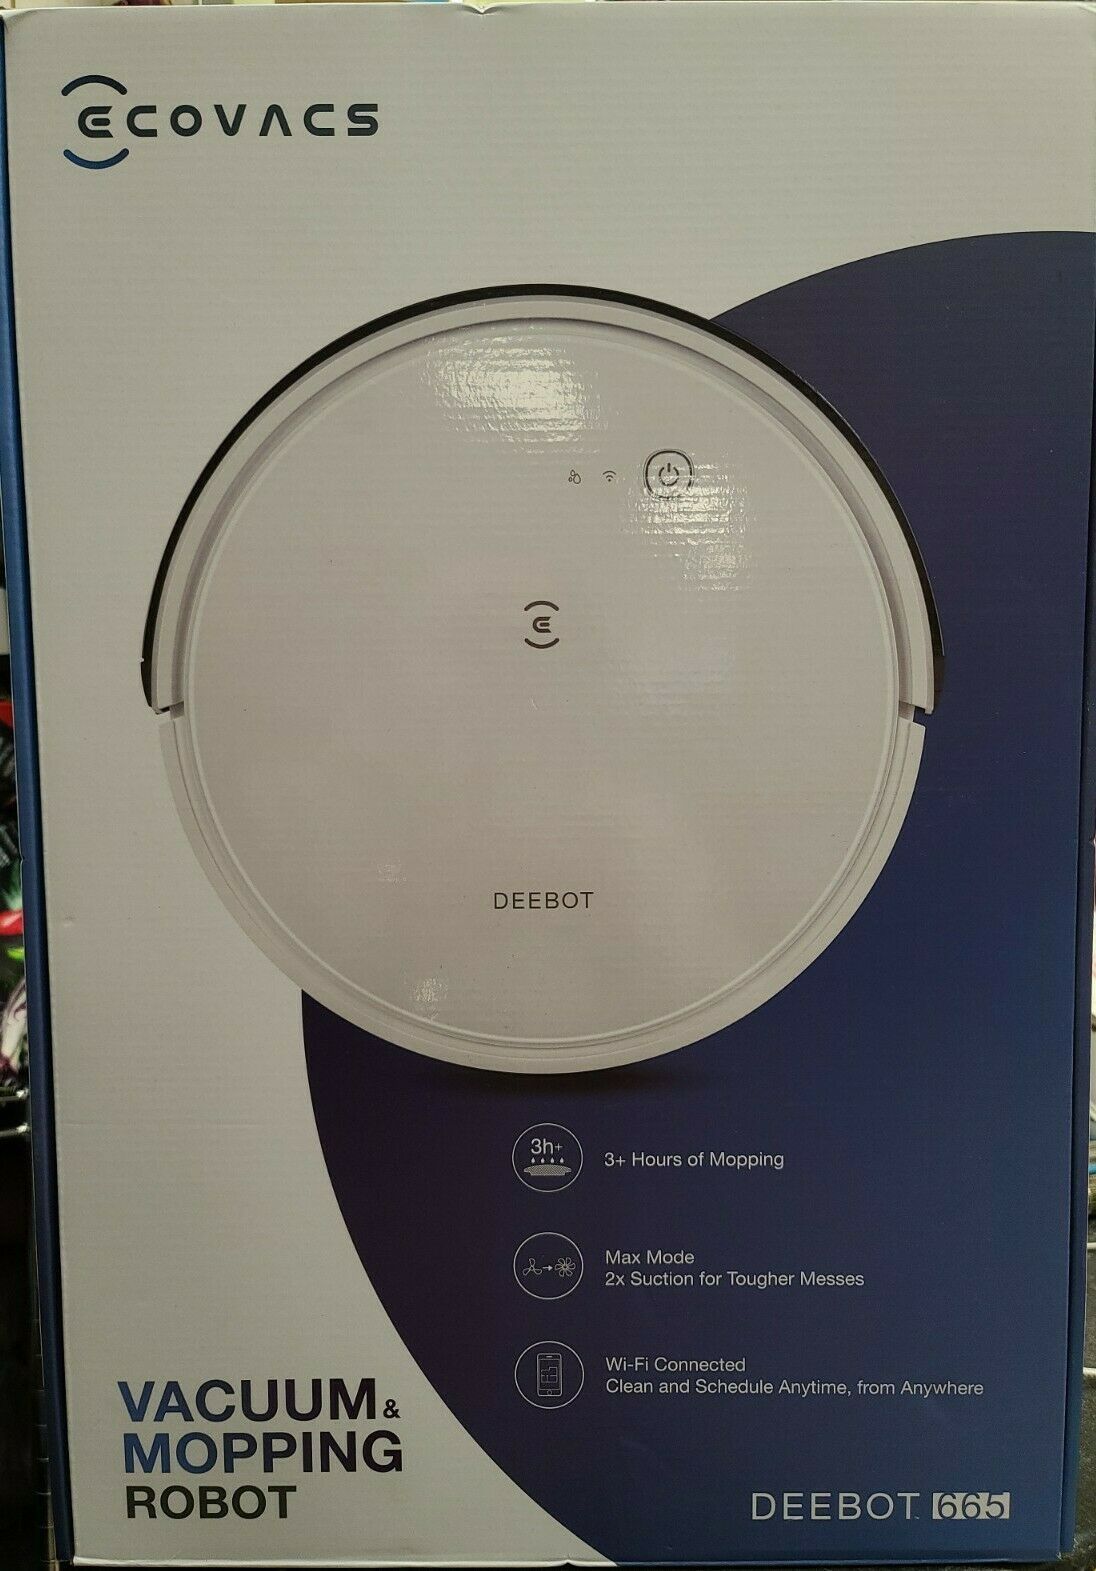 New Ecovacs Deebot 665 Multi-Surface Wi-Fi and App Controlled Robot Vacuum and Mop - White